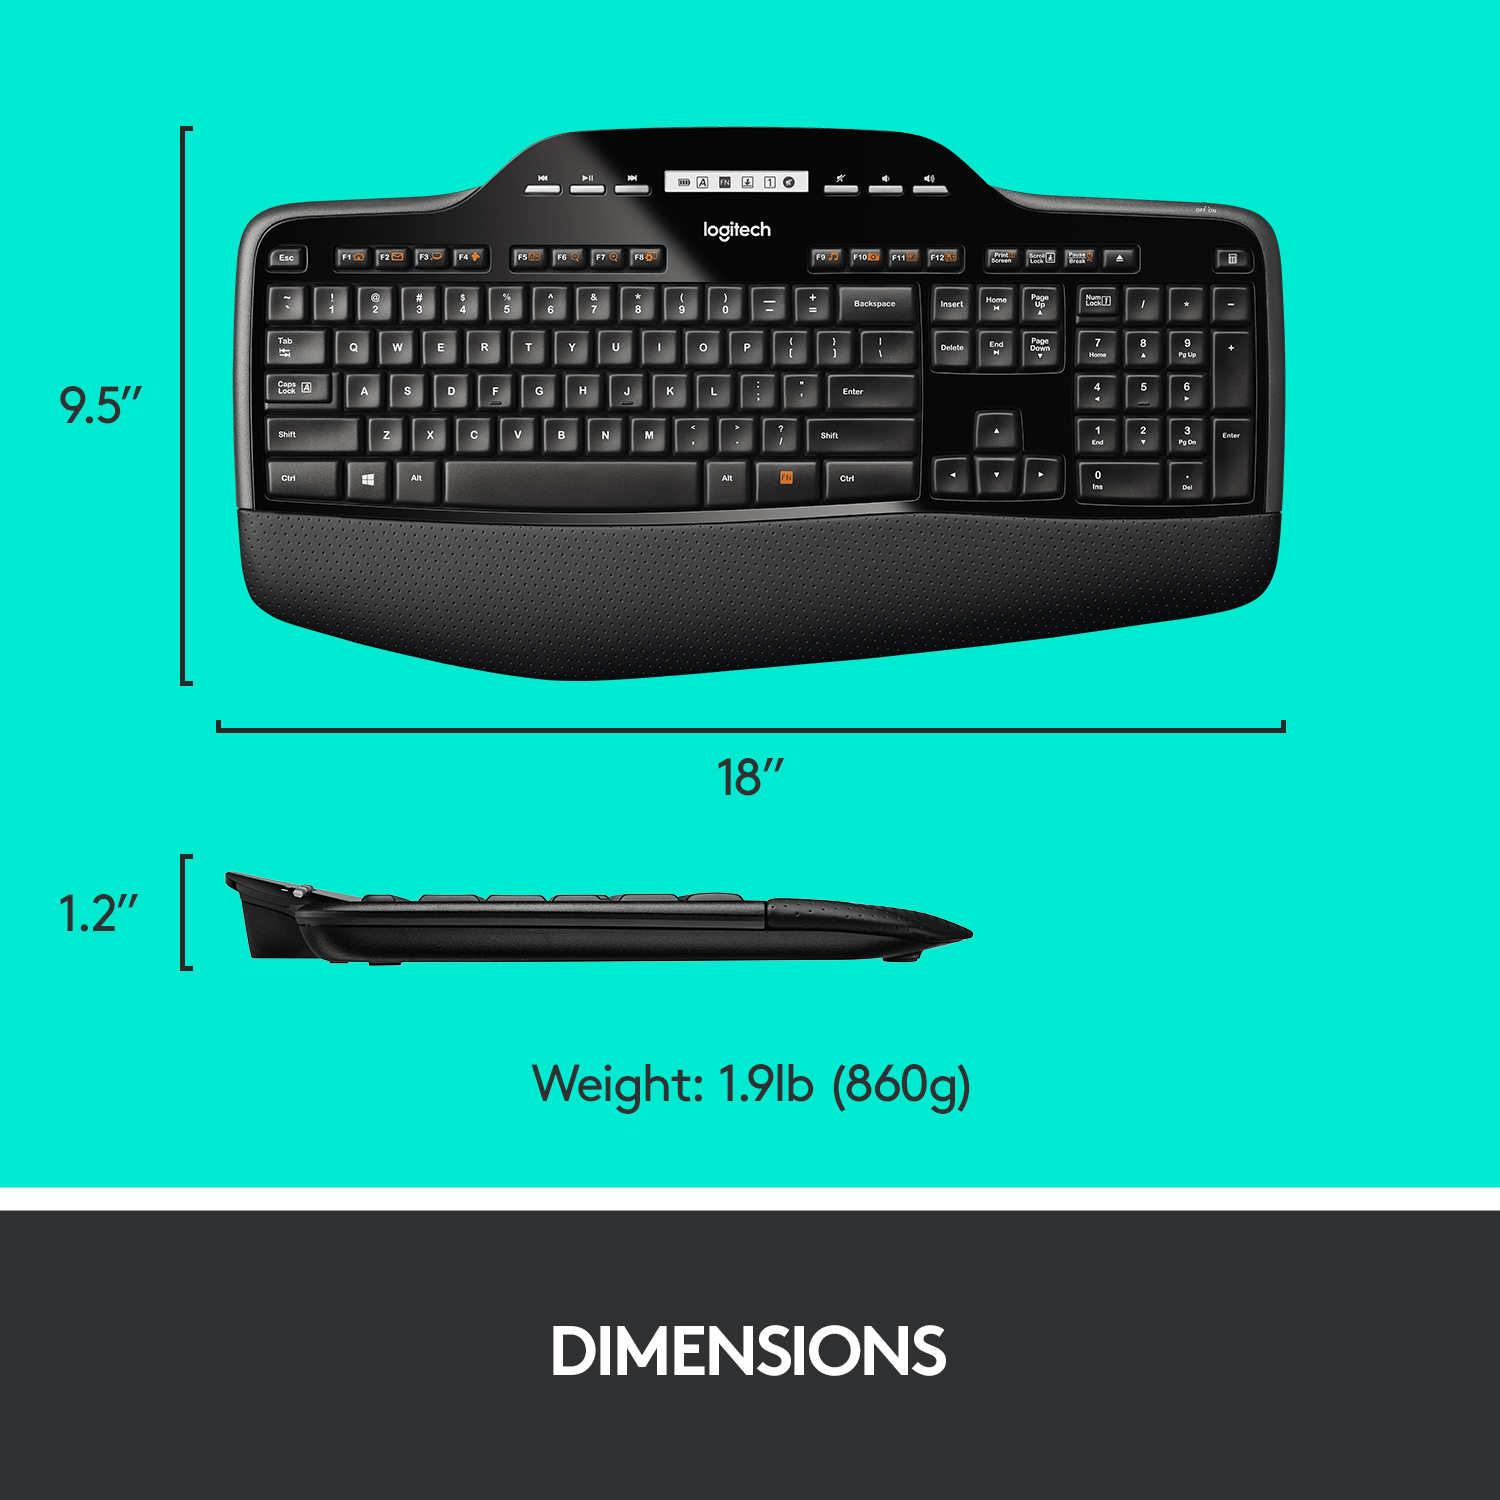 Logitech MK710 Full-size Wireless Keyboard with Bundle Battery Black Buy Life 920-002416 Windows Mouse Best and - for 3-Year